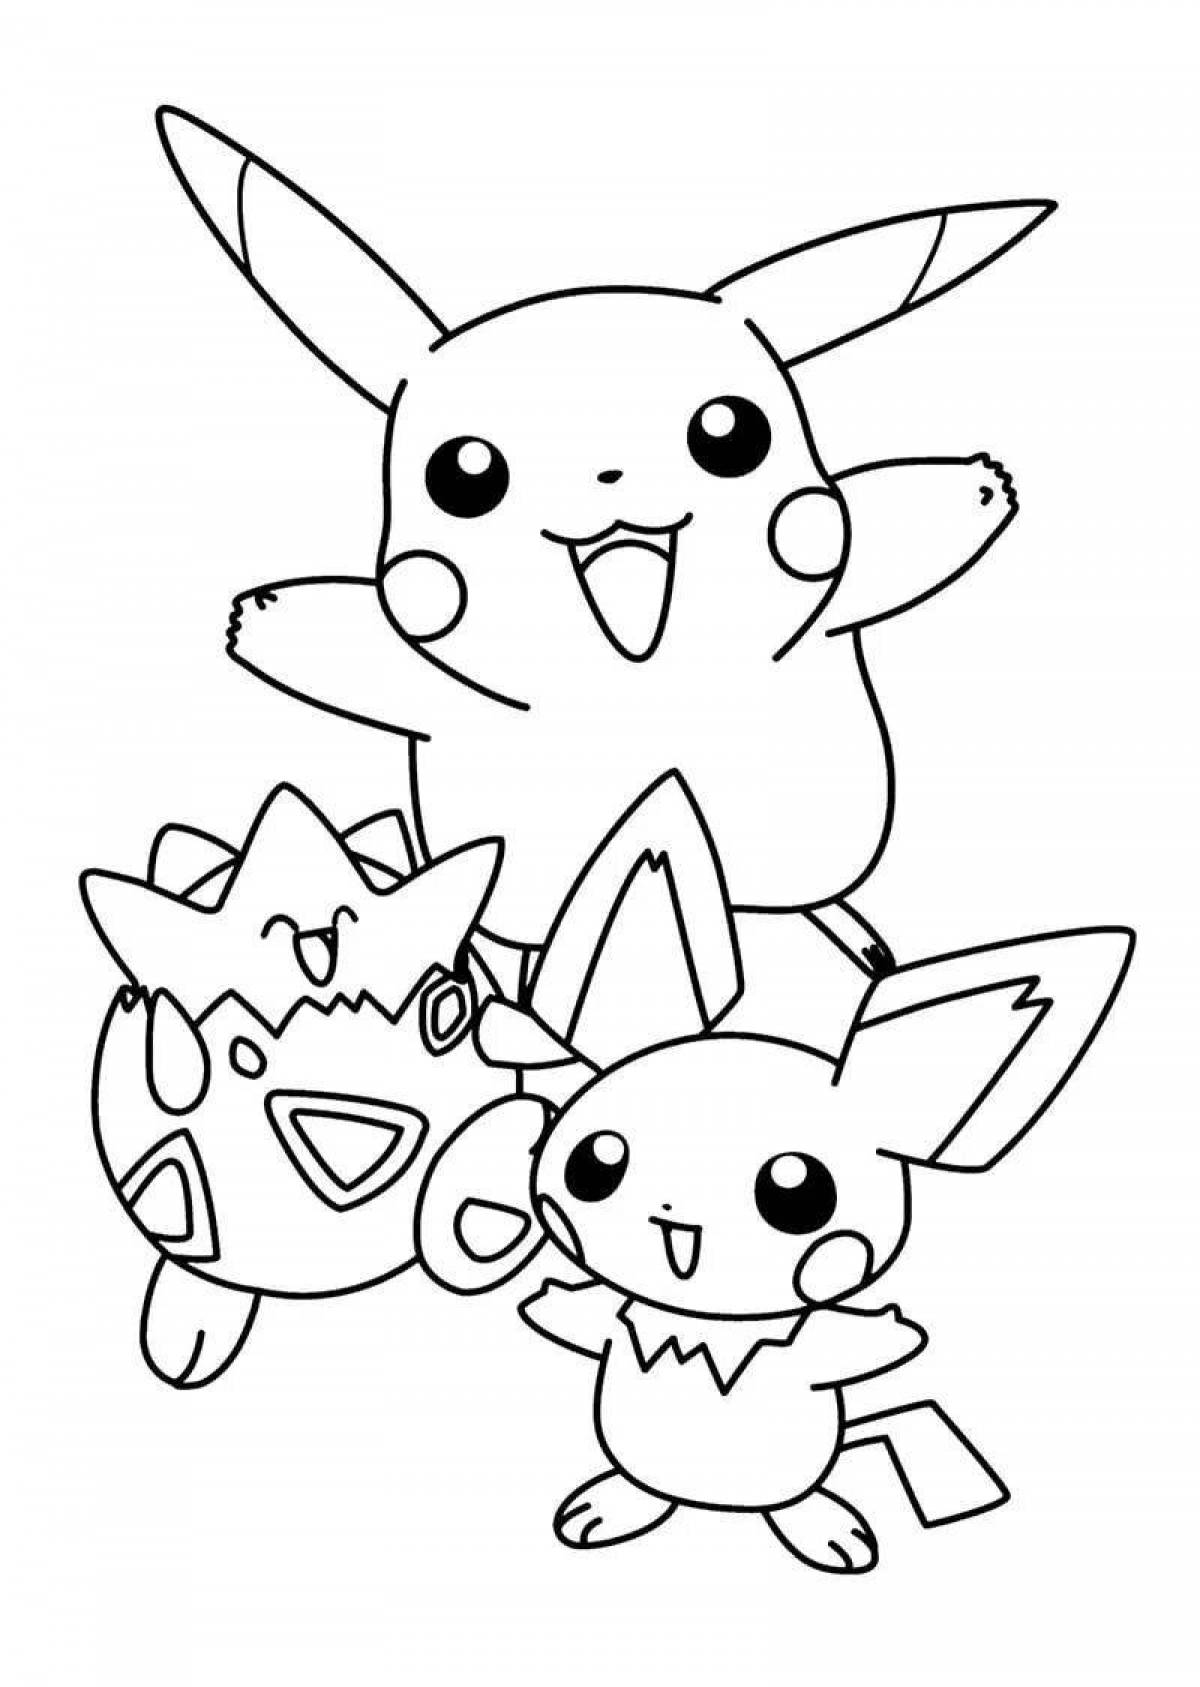 Playful pokemon coloring for kids